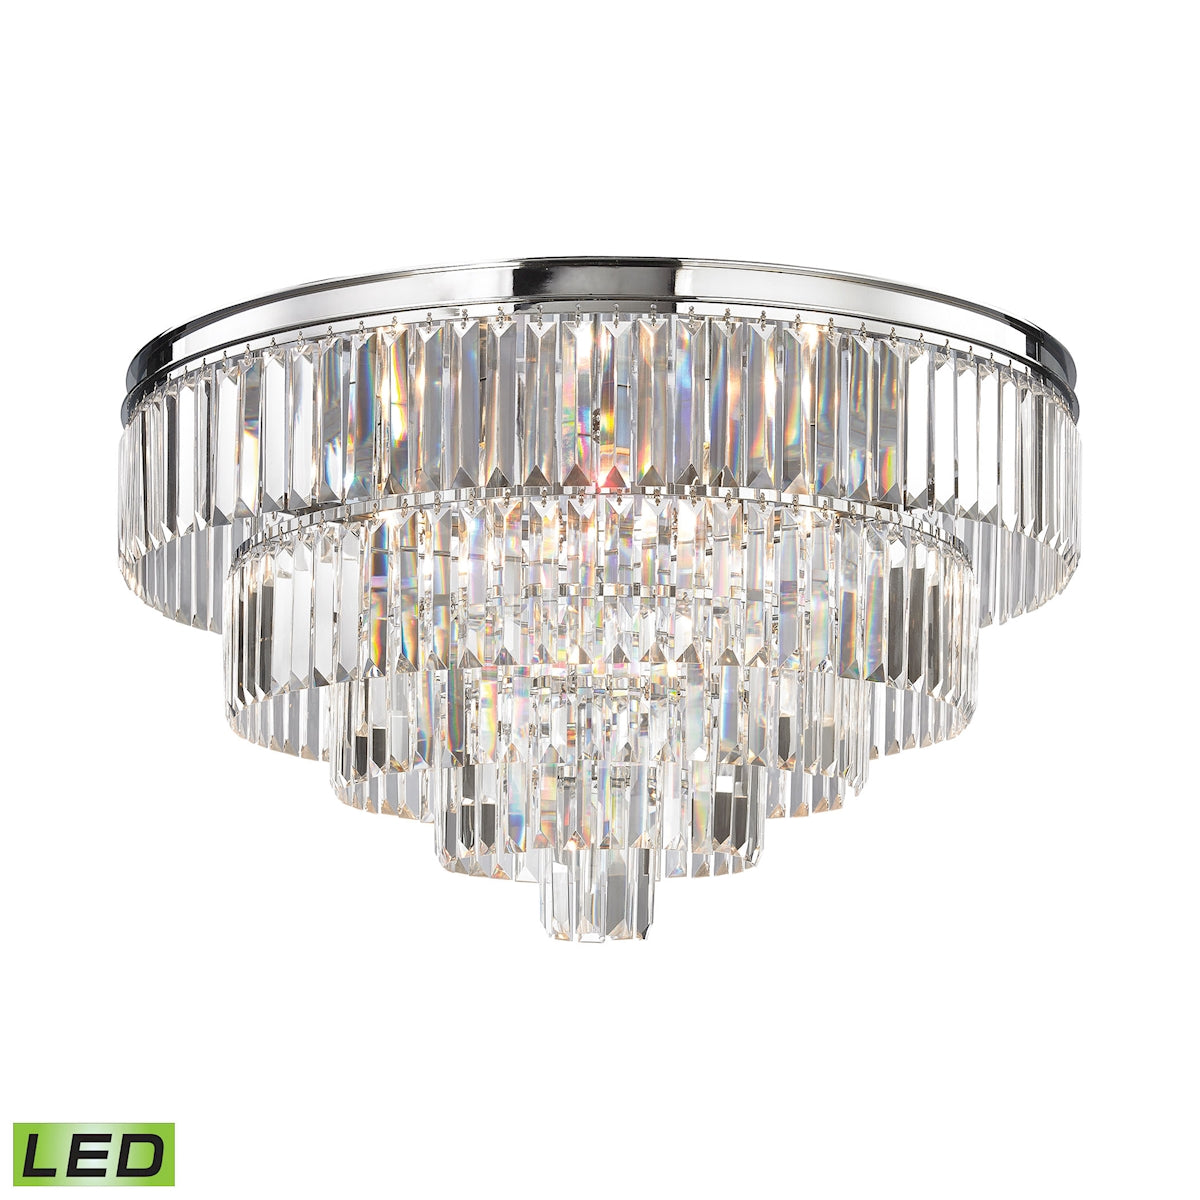 Palacial 6-Light Chandelier in Polished Chrome with Clear Crystal - Includes LED Bulbs